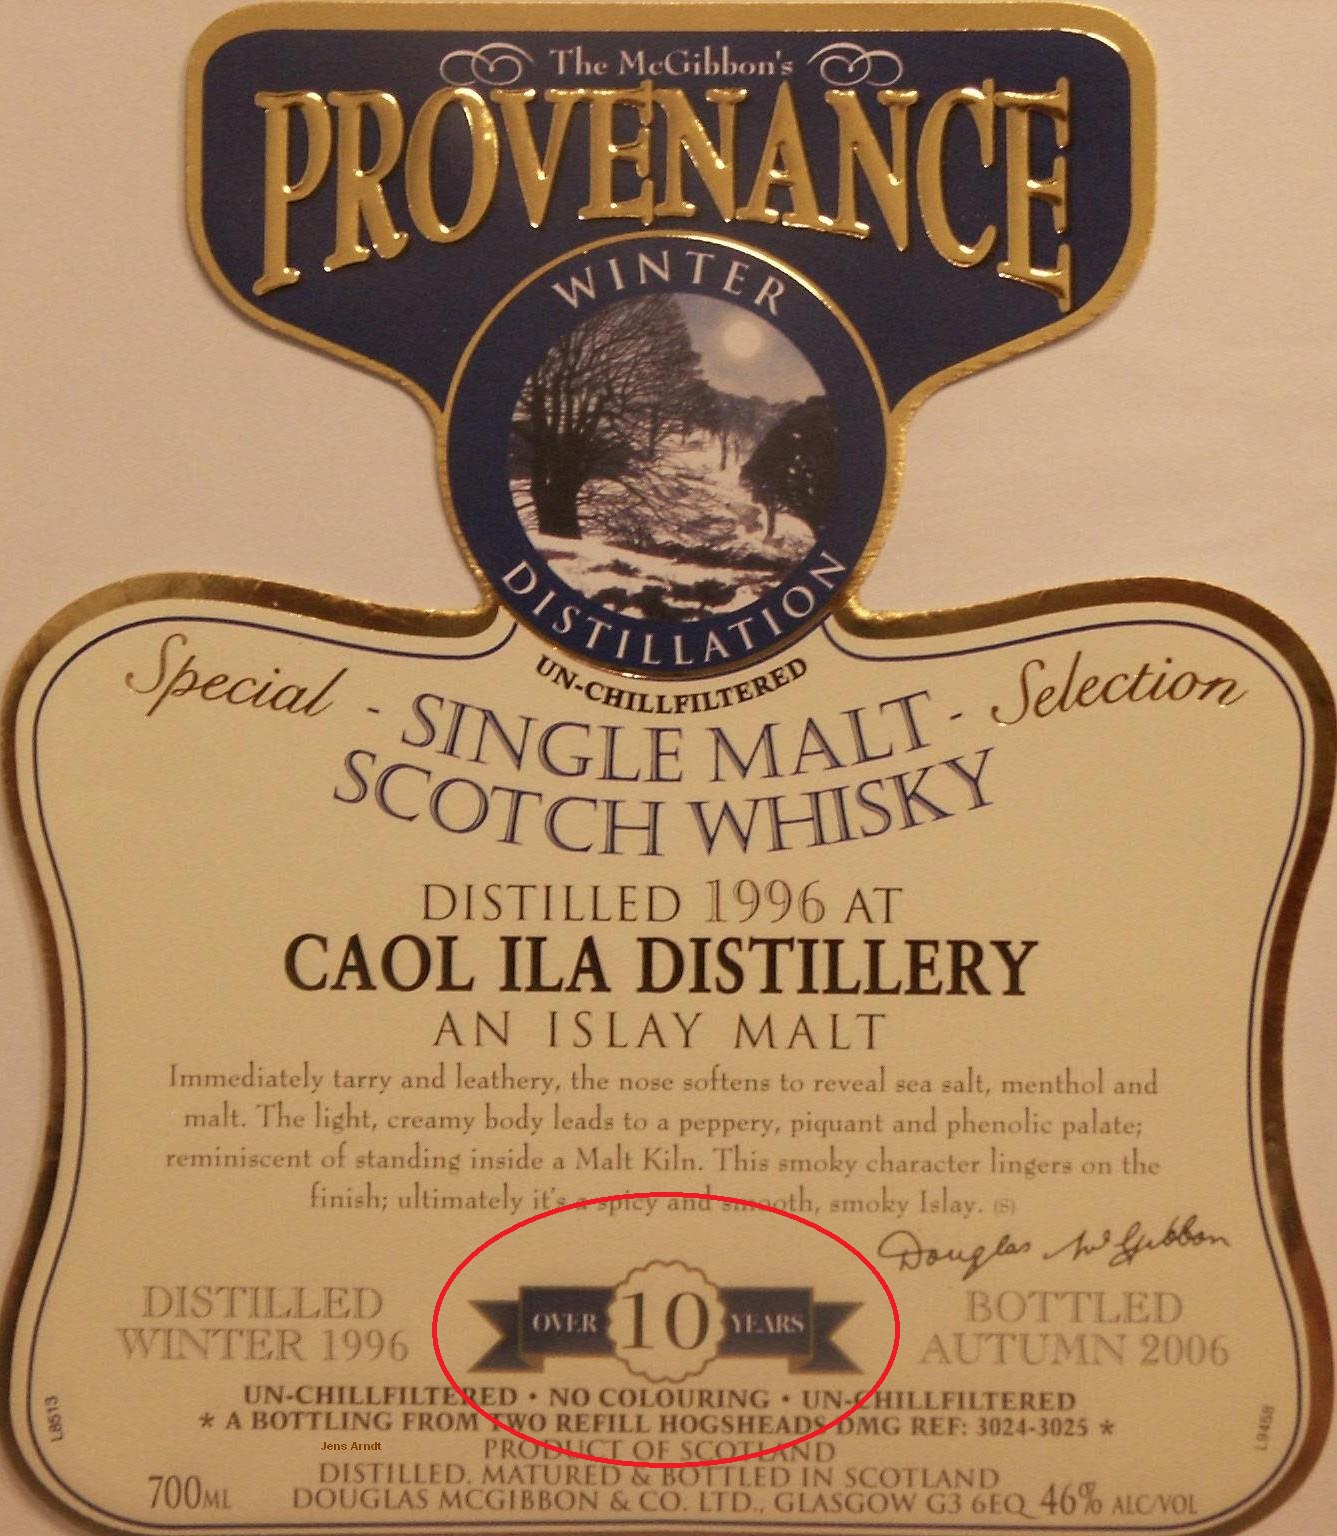  2005 - 2008  Speciales Provenance Whisky Label